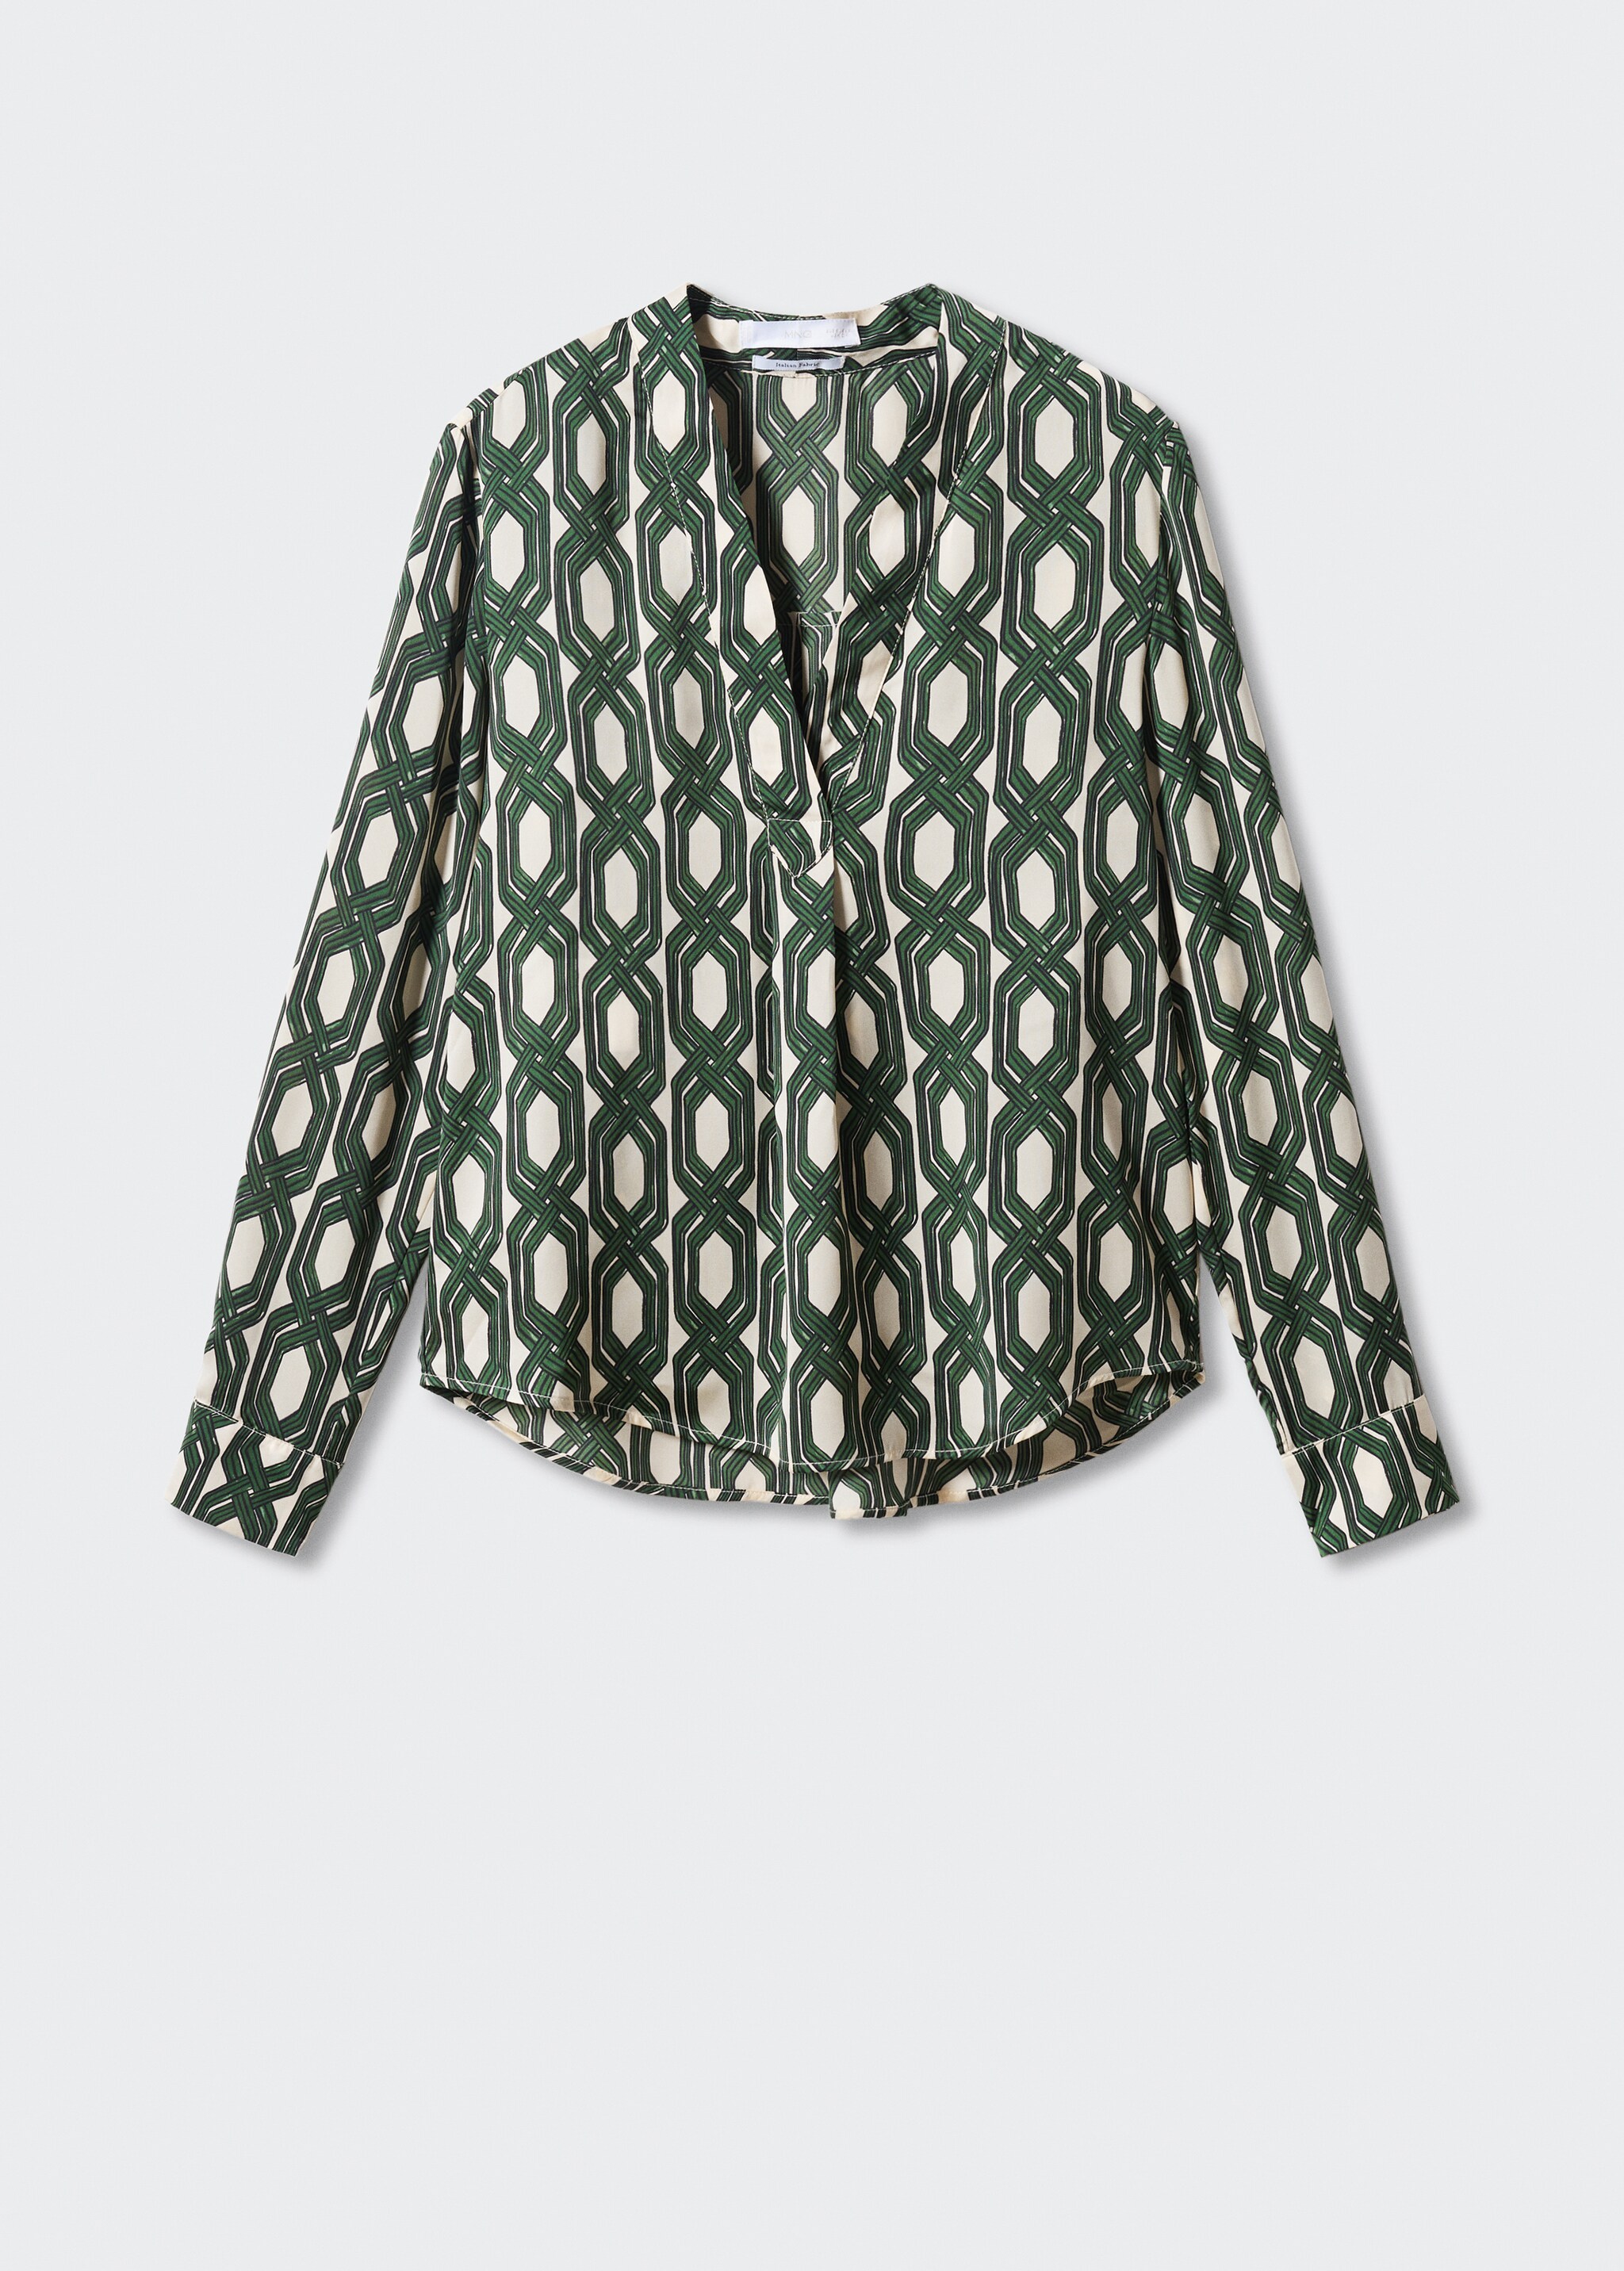 Geometric-print blouse - Article without model